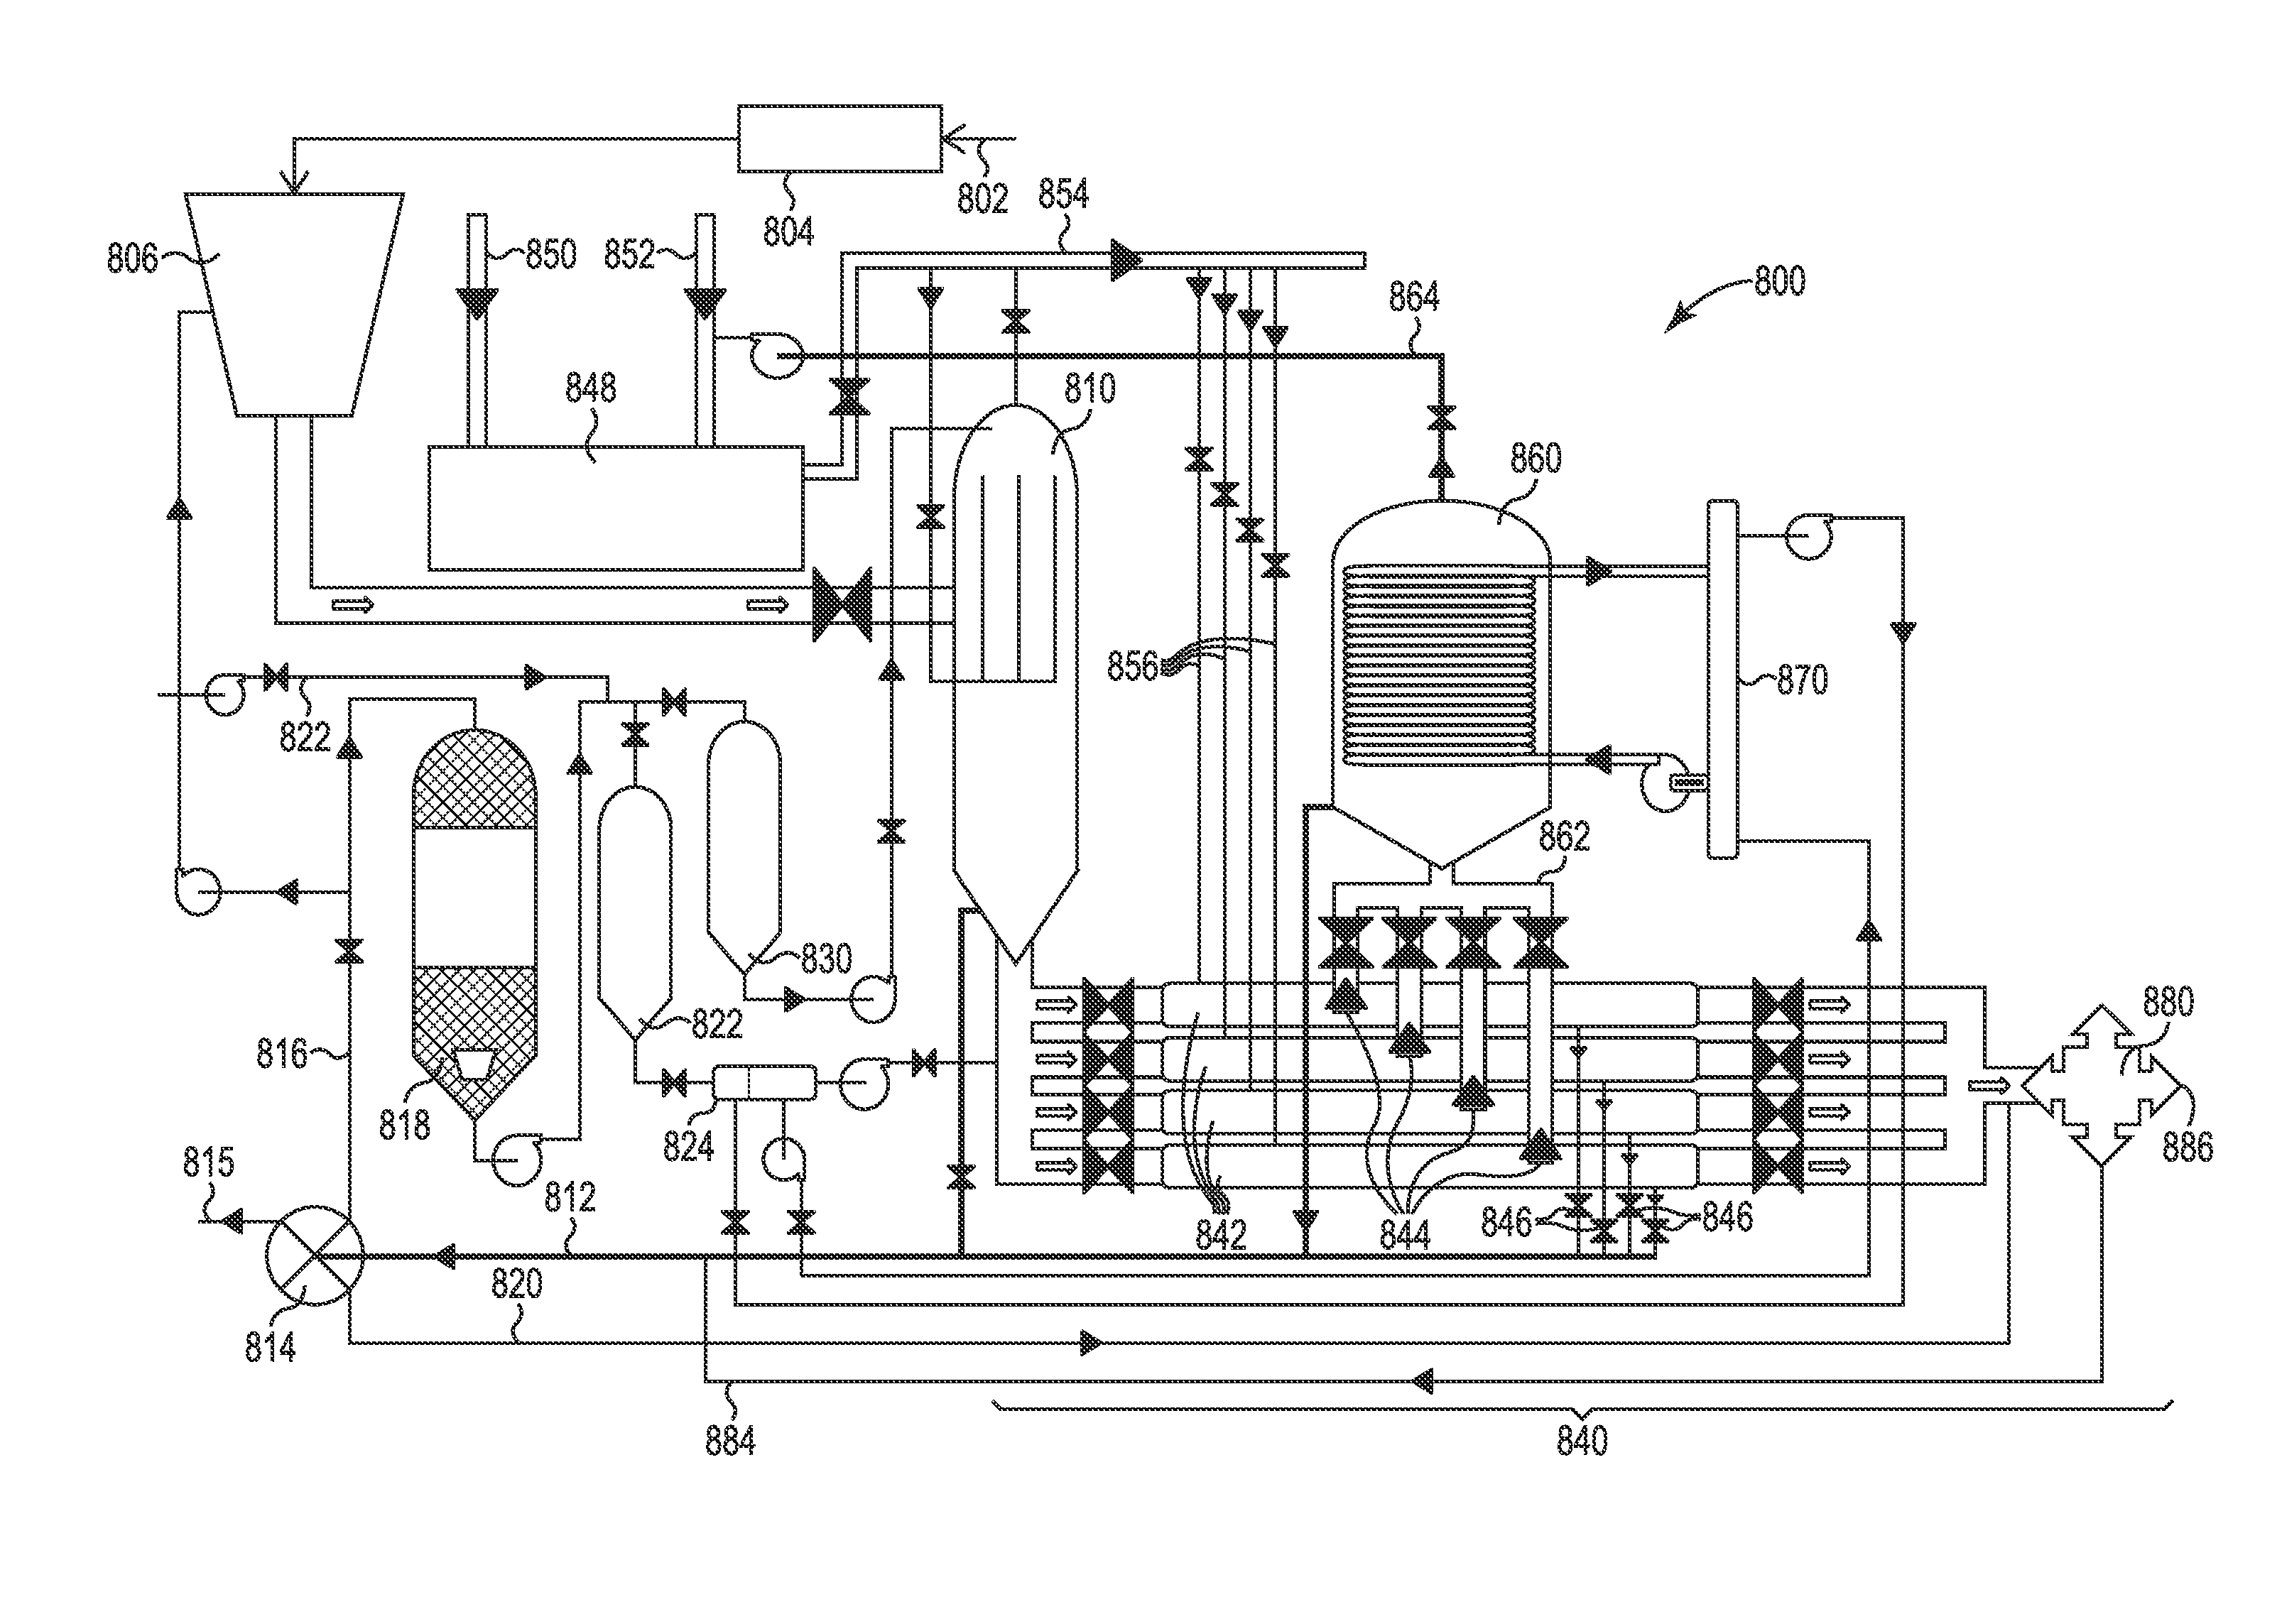 System of Using a Reaction Chamber to Beneficiate Organic-Carbon-Containing Feedstock for Downstream Processes